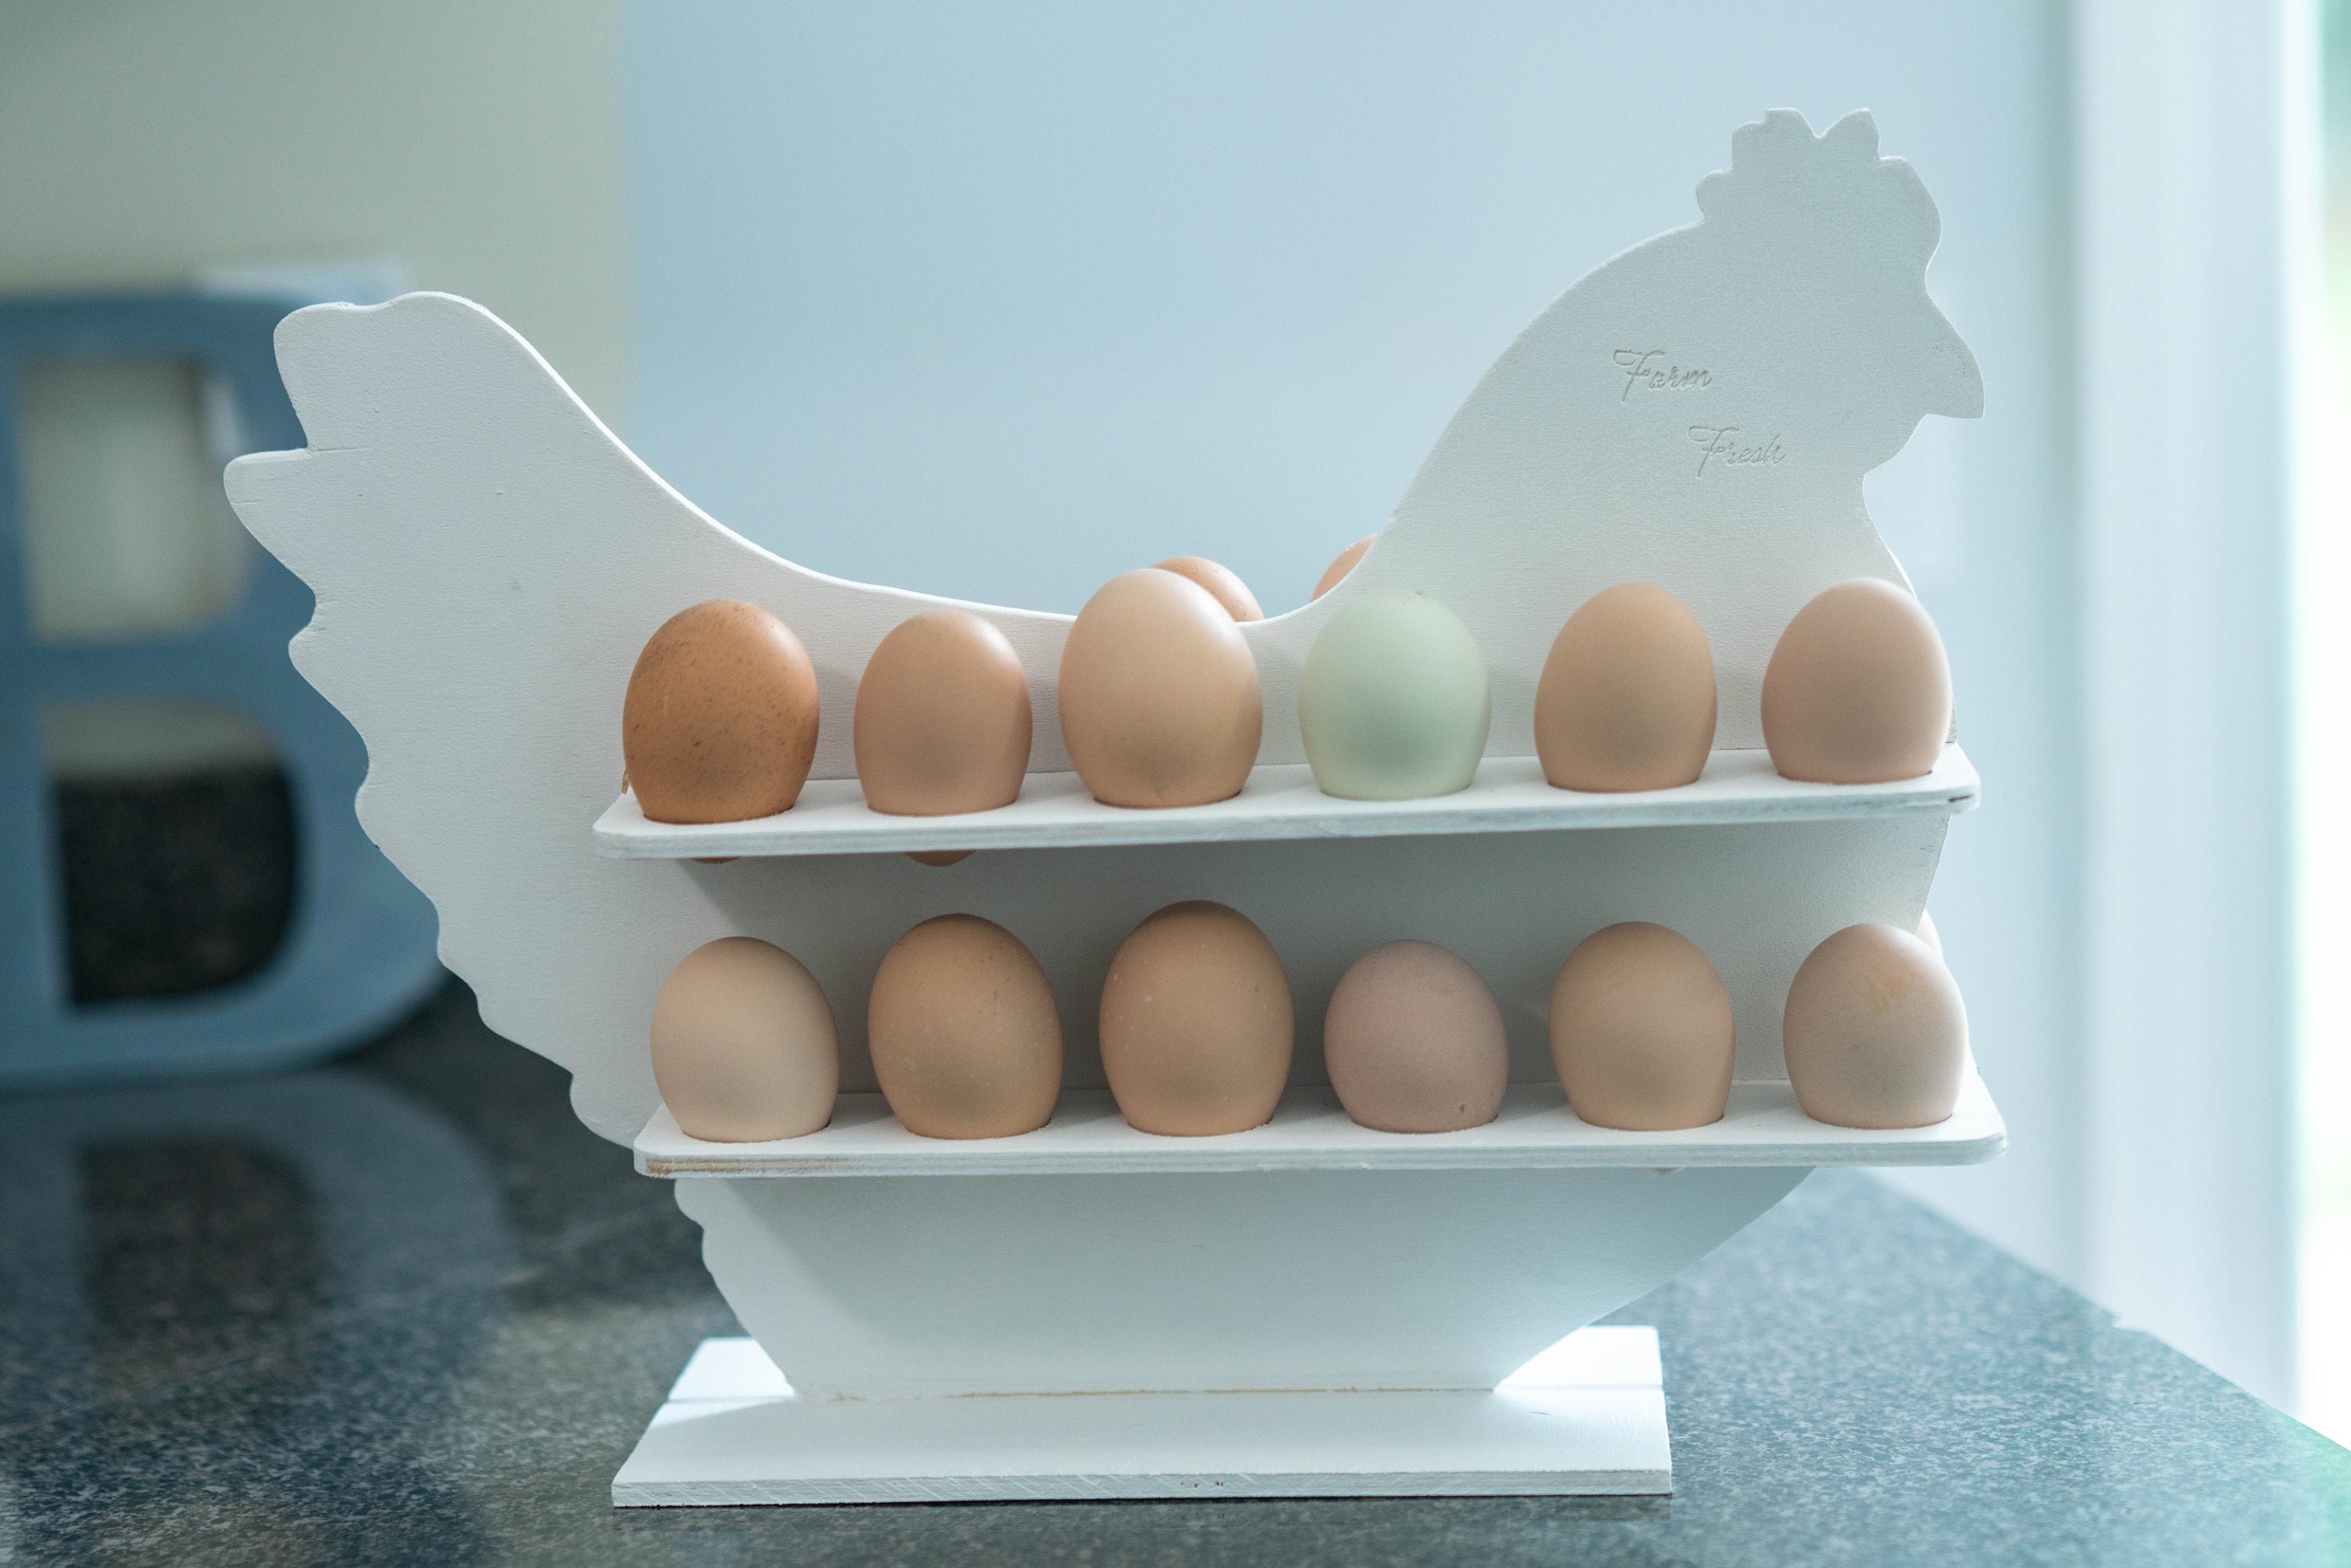 Personalized Wooden Chicken-shaped Egg Holder Storage & Display for Farm  Fresh Eggs Countertop Kitchen Accessory Two Dozen Eggs Rack 